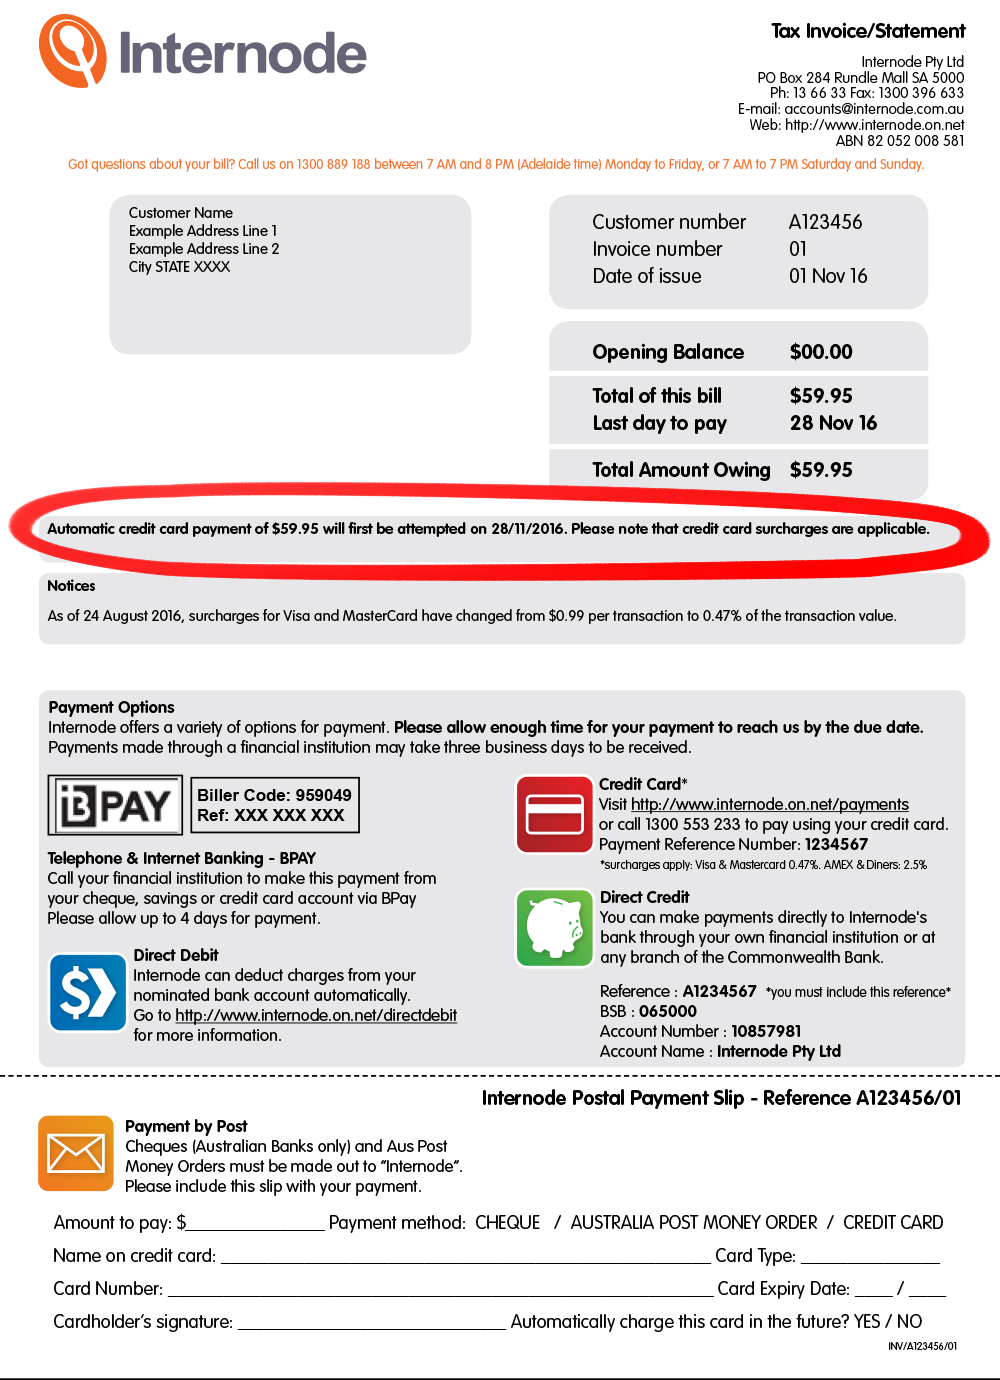 Example Invoice showing when an Automatic Payment will take place